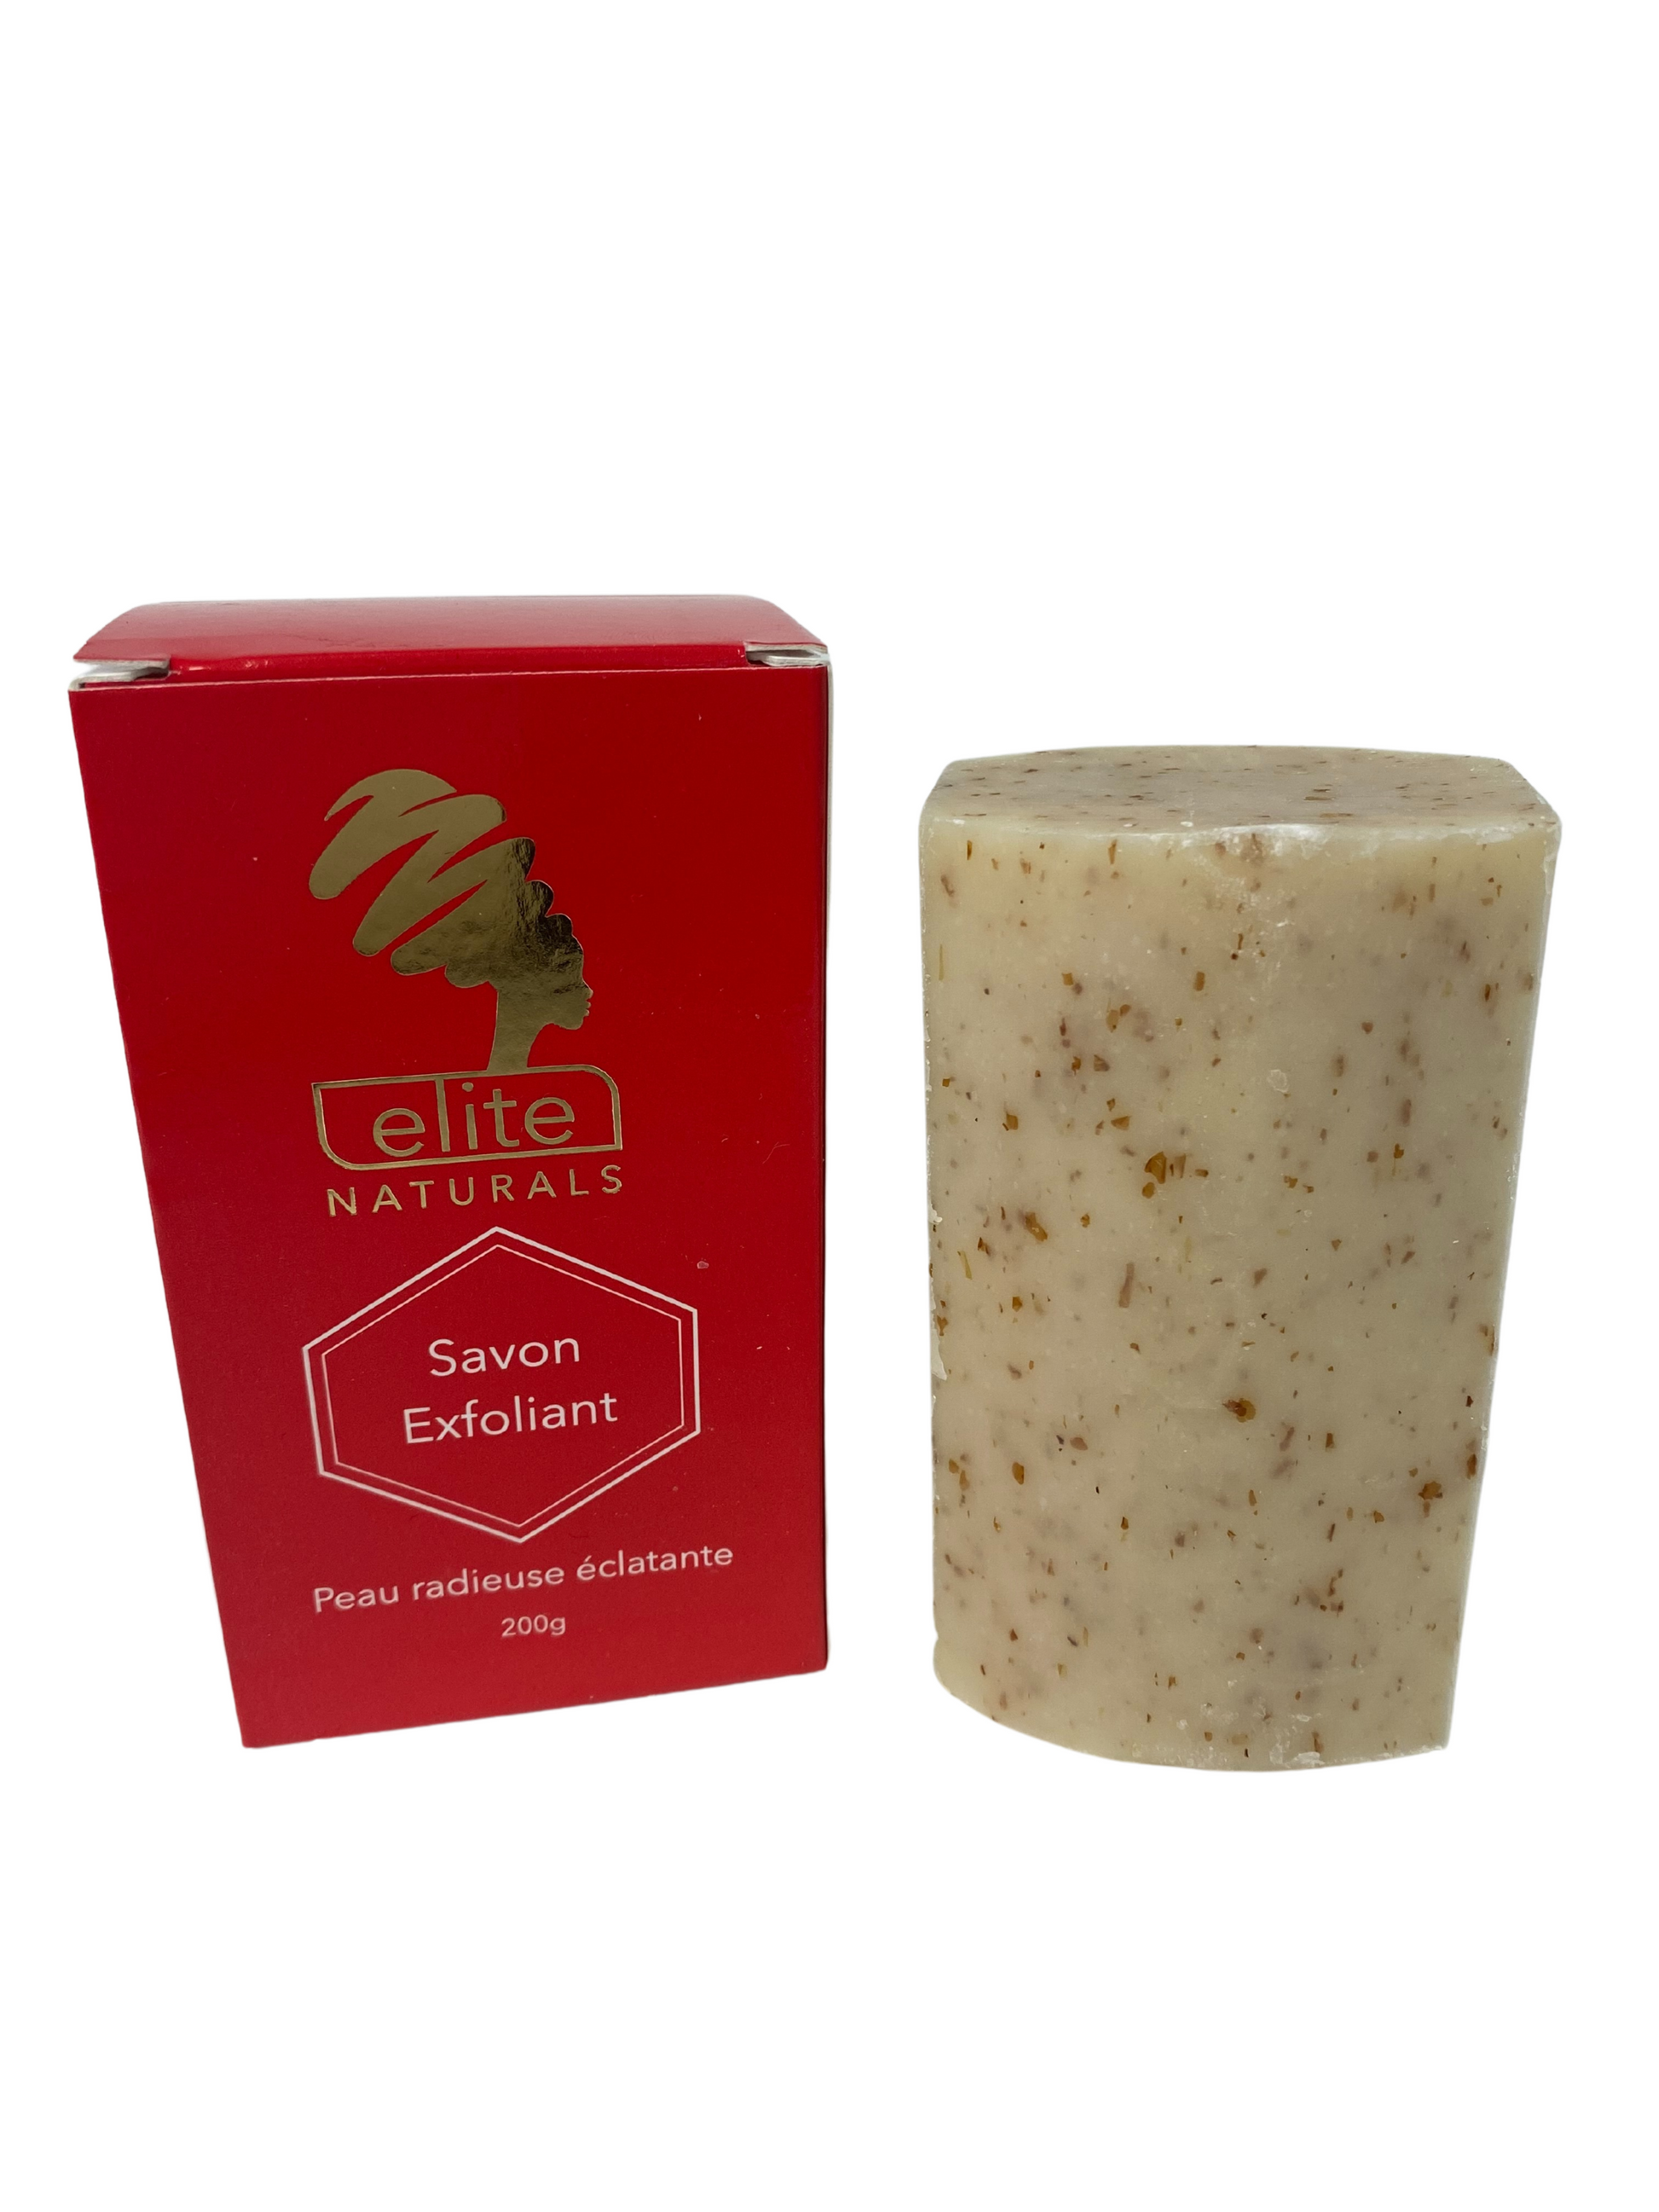 Exfoliating bar soap for brighter complexion. Stops acne breakouts eczema body odor  makes skin soft smooth and radiant.